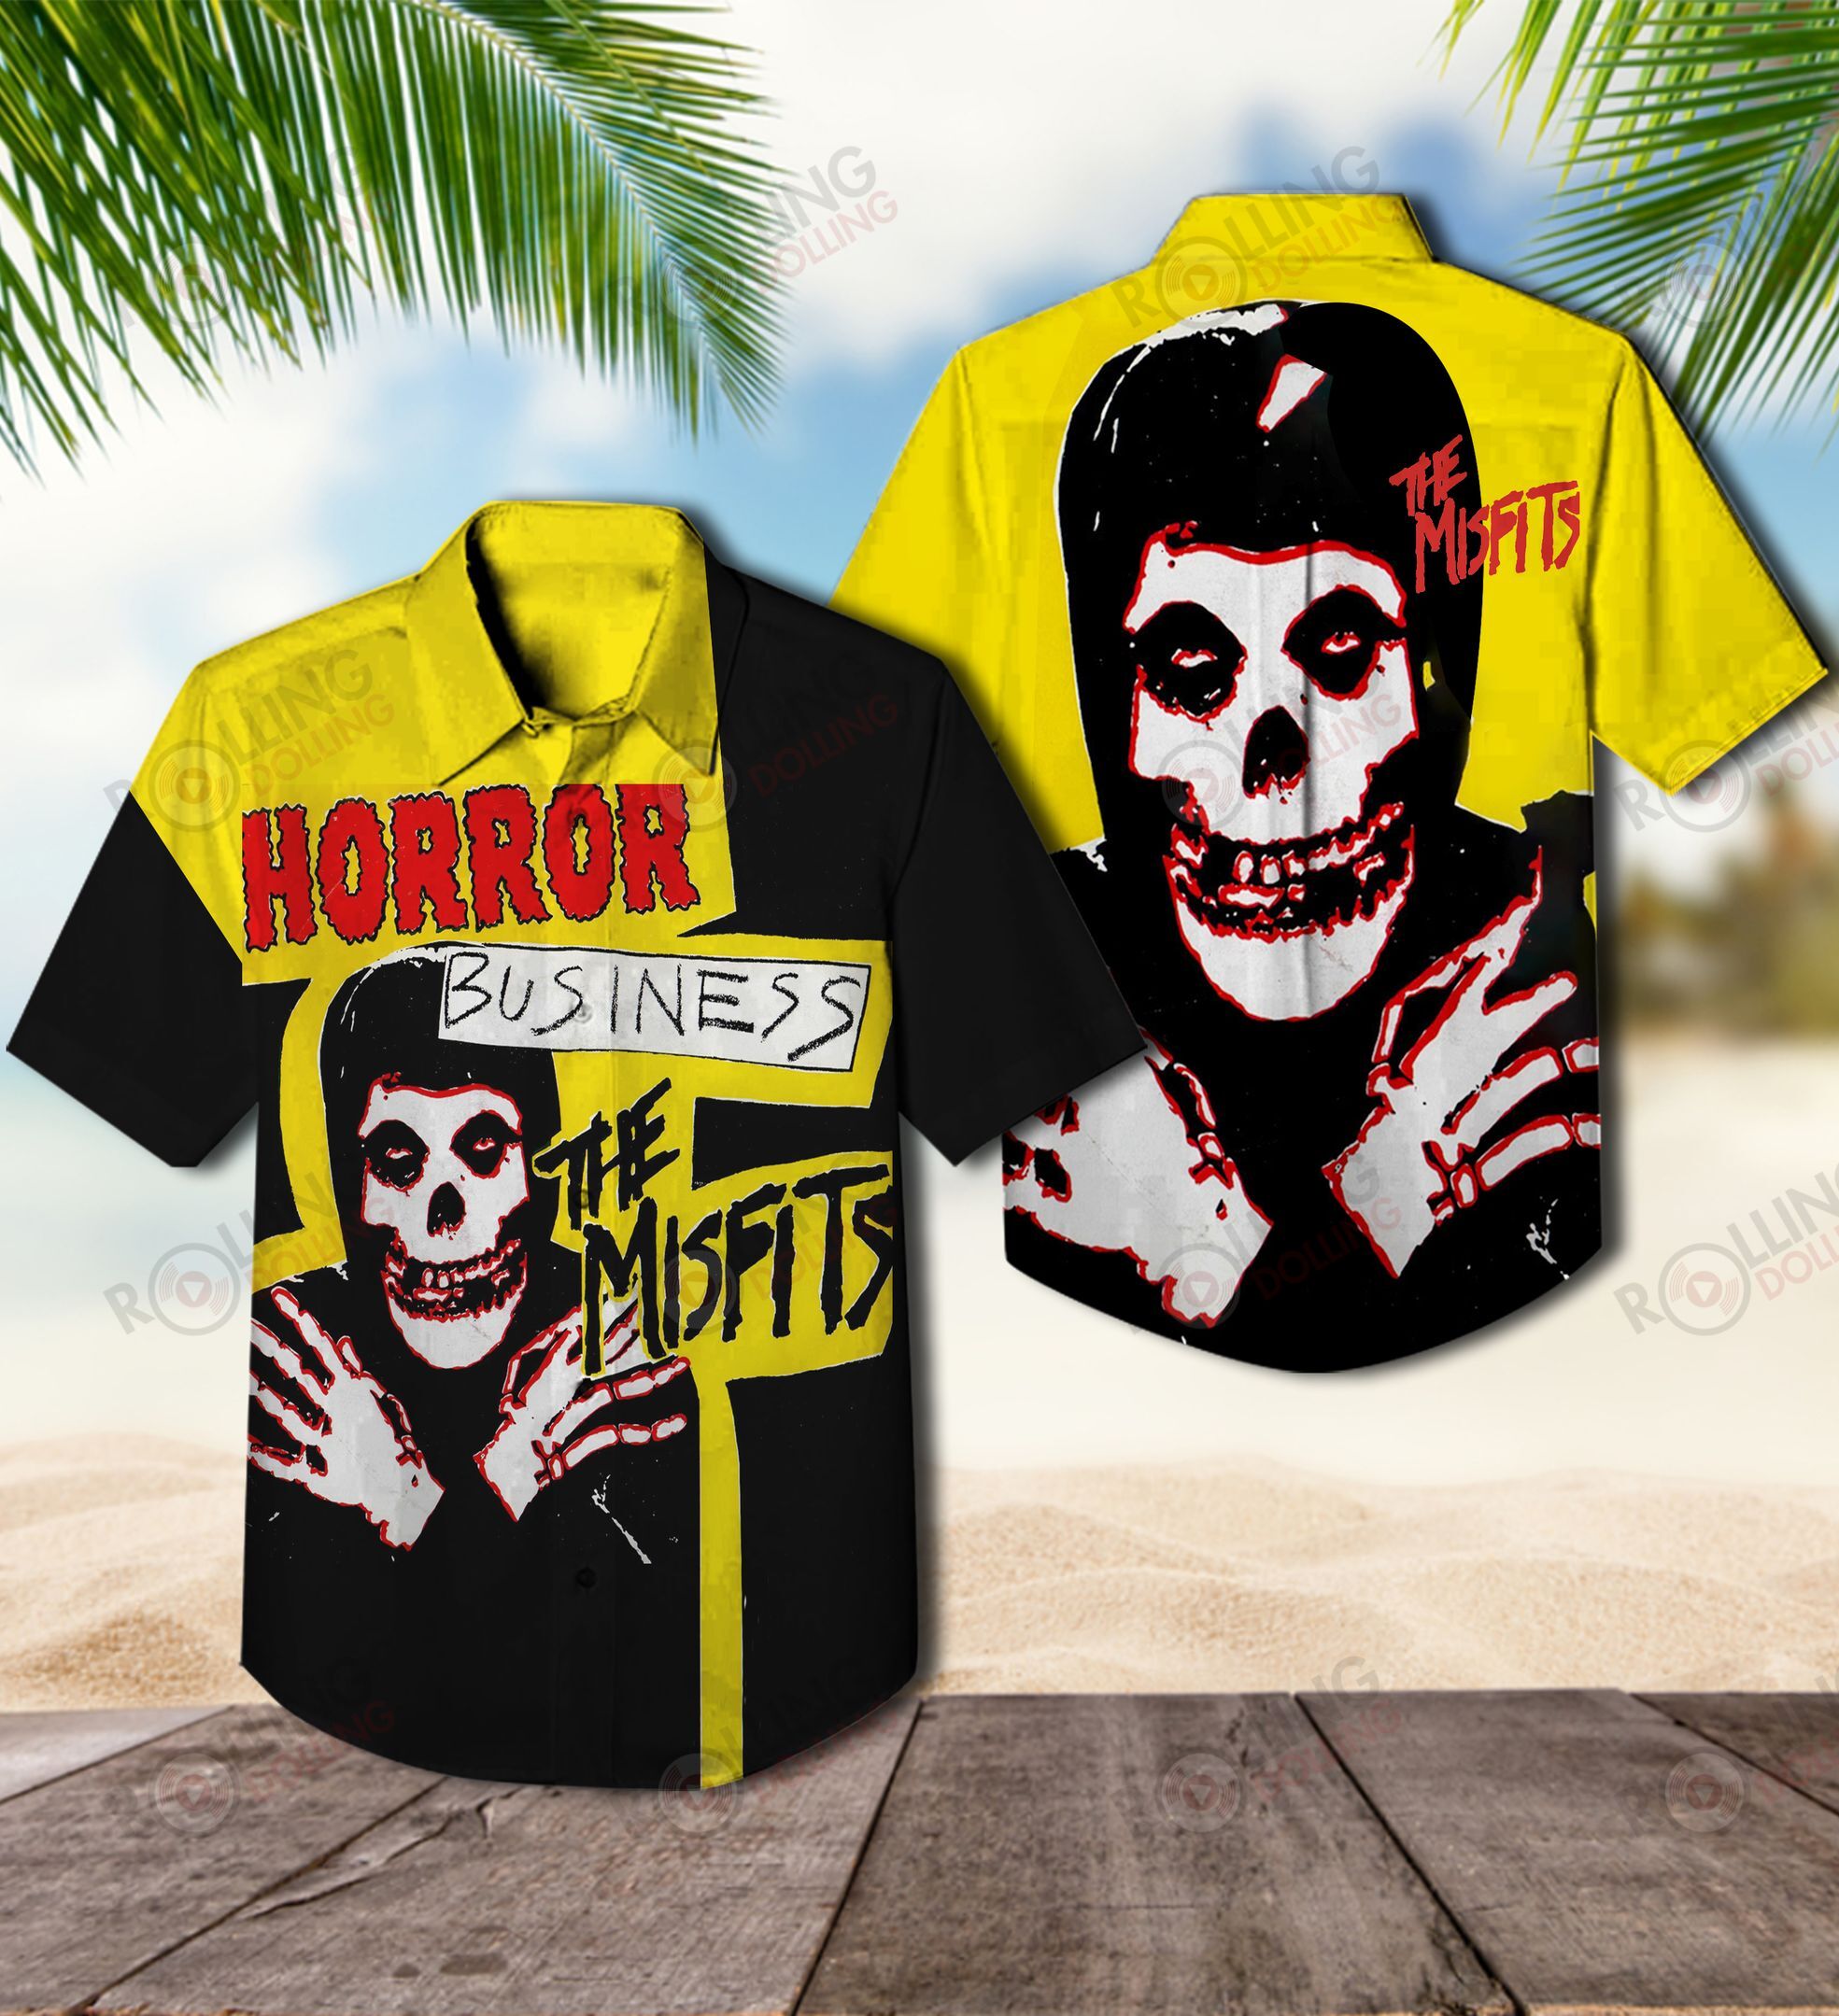 This would make a great gift for any fan who loves Hawaiian Shirt as well as Rock band 24